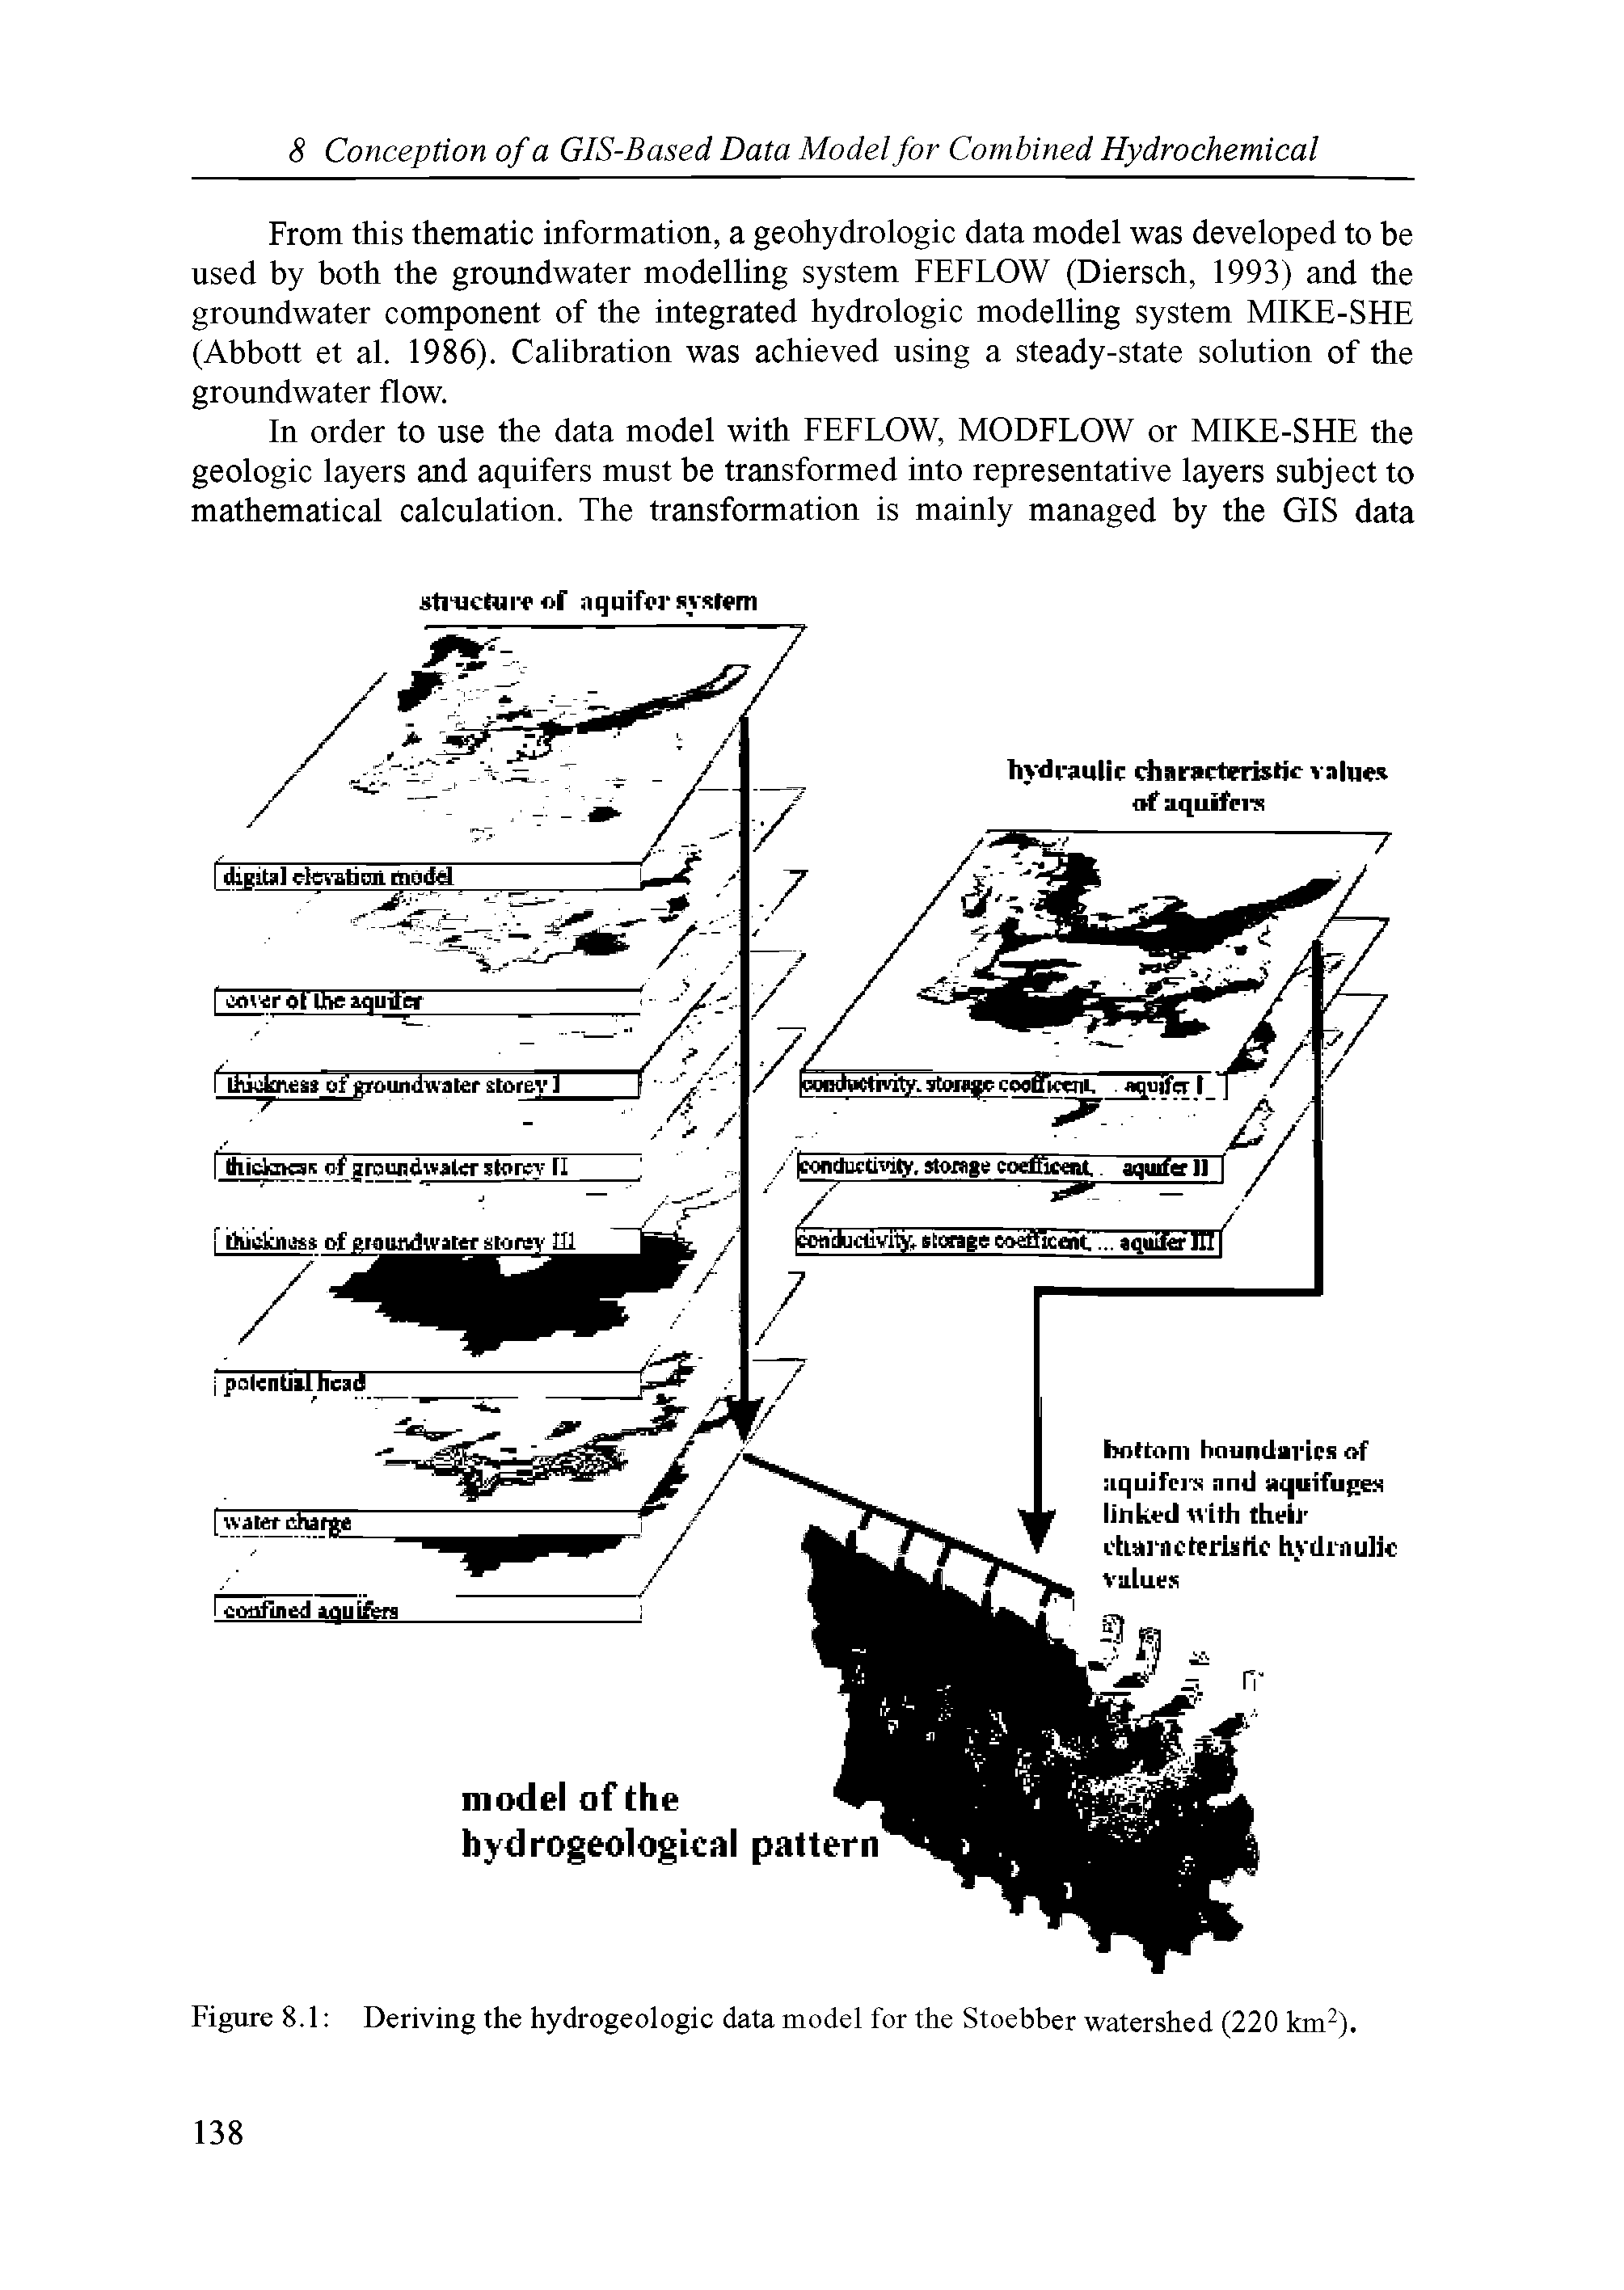 Figure 8.1 Deriving the hydrogeologic data model for the Stoebber watershed (220 km ).